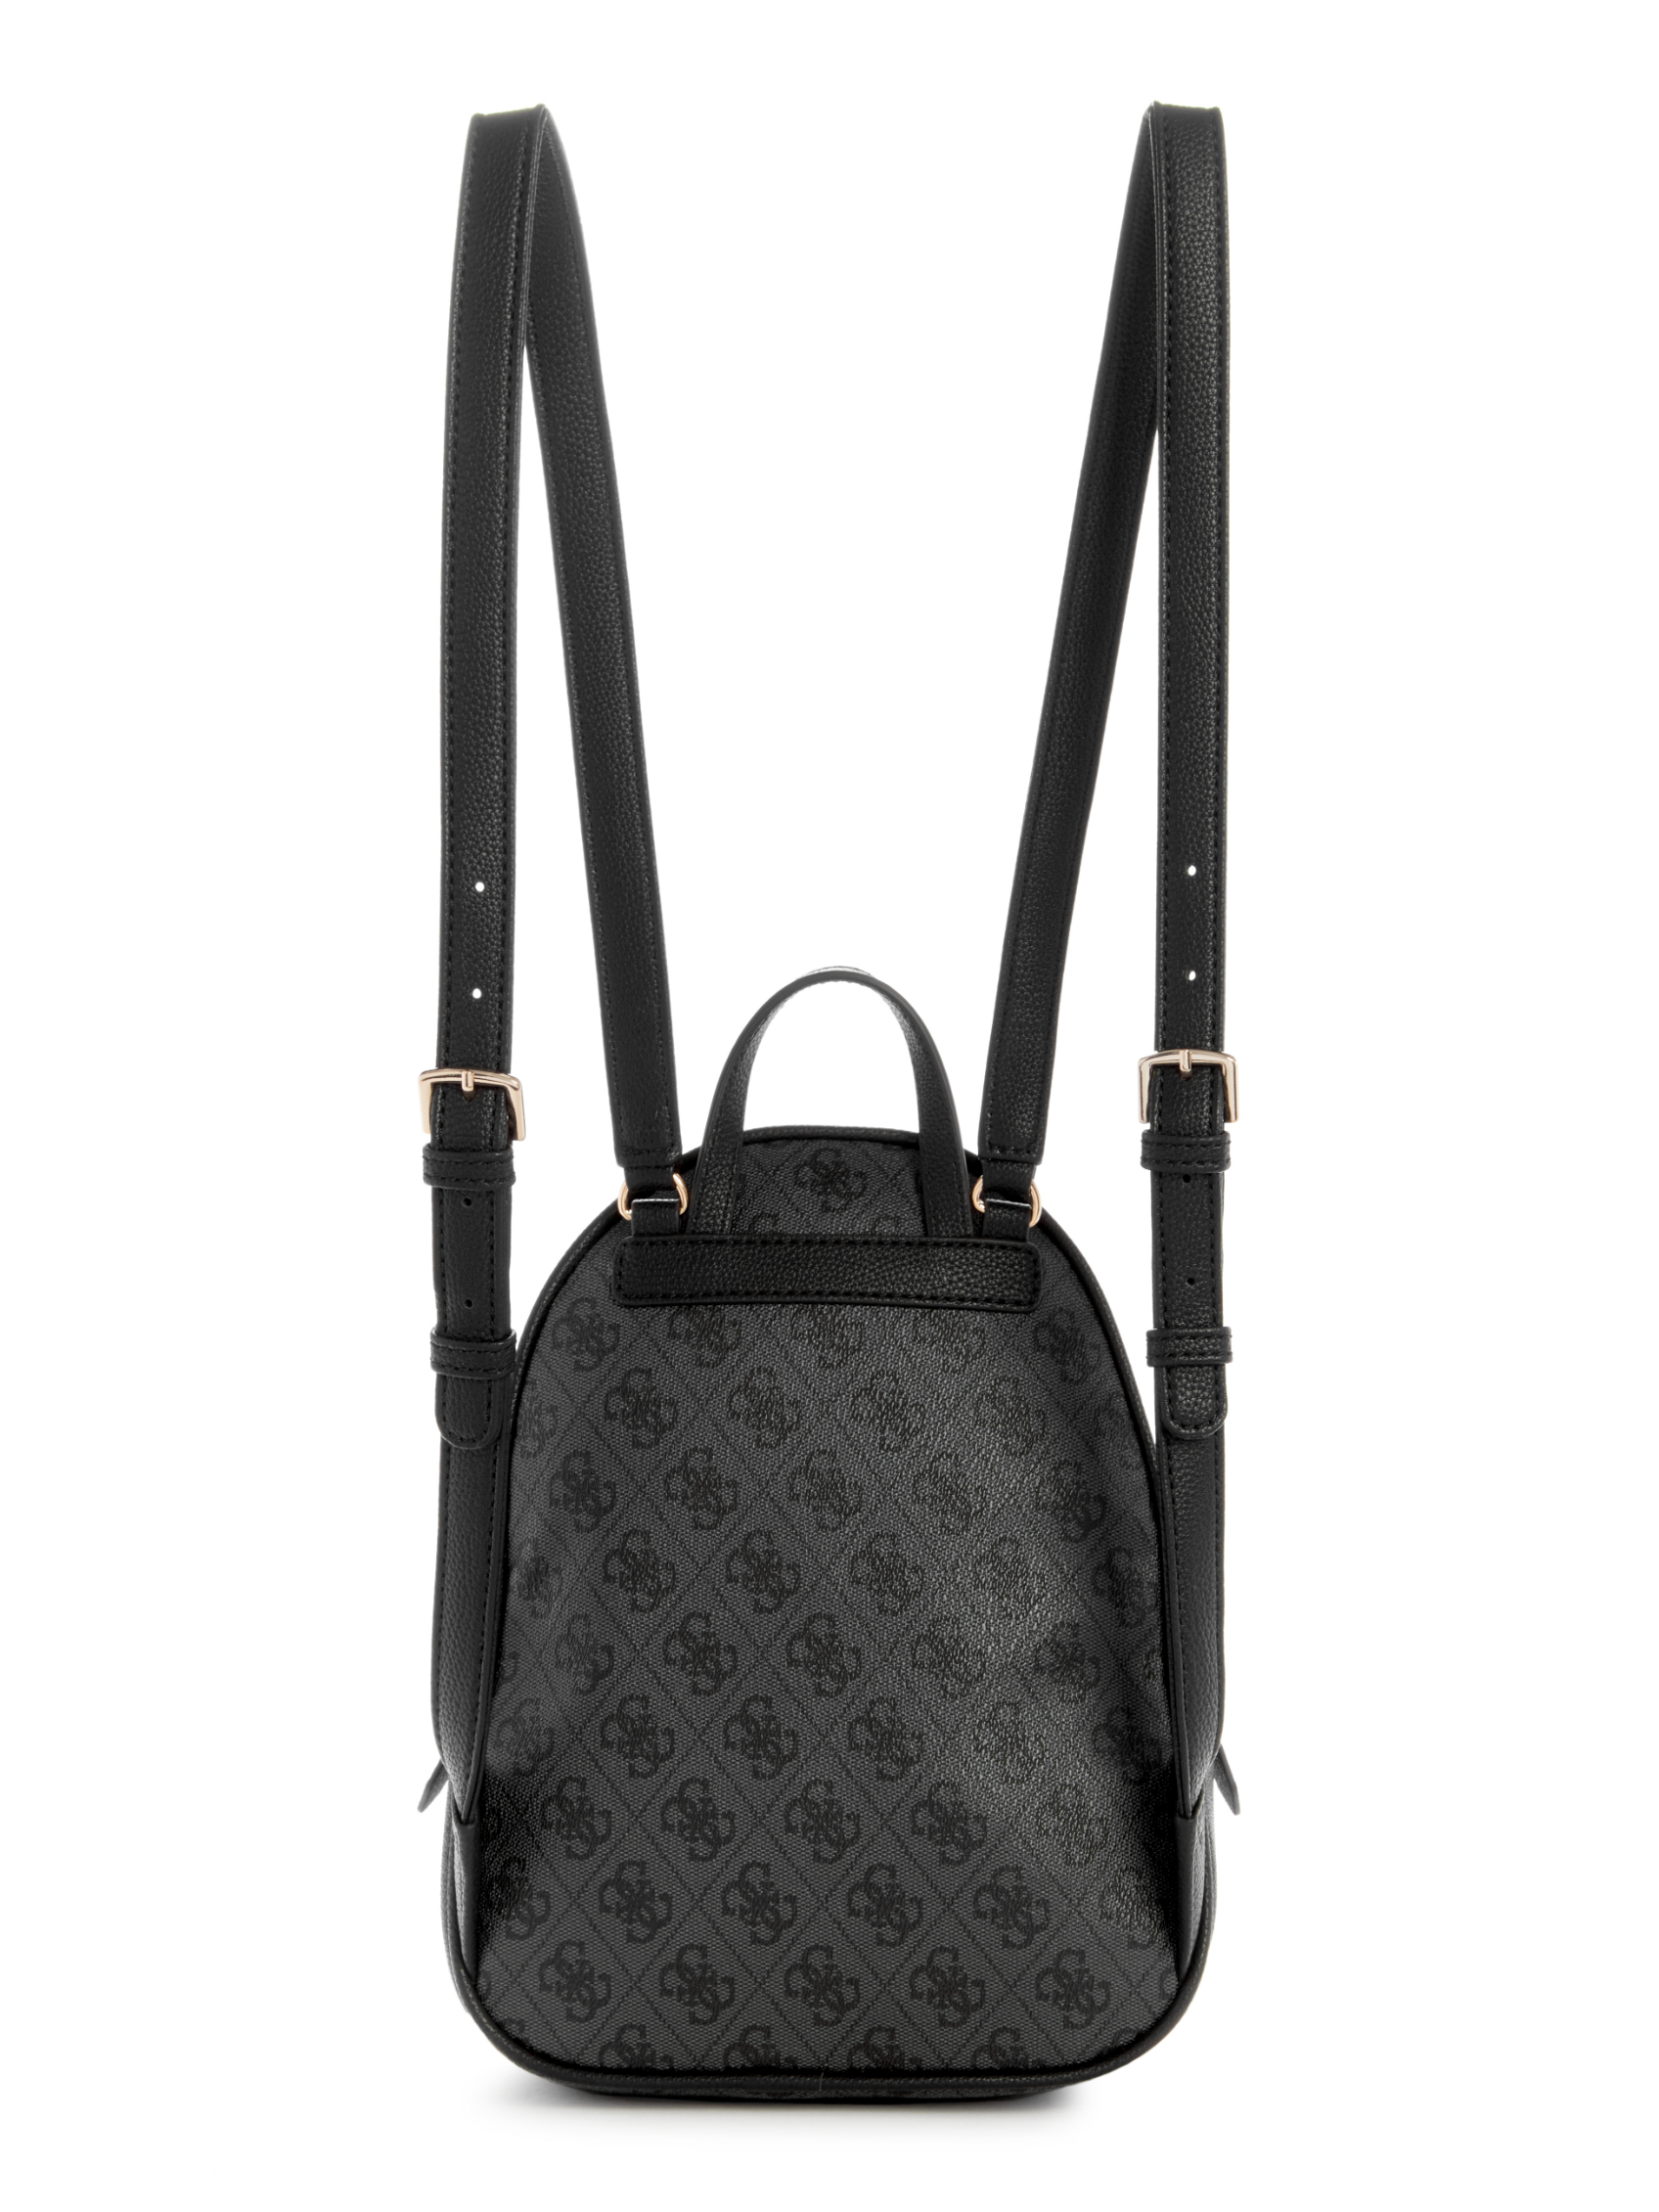 MANHATTAN BACKPACK | Guess Philippines